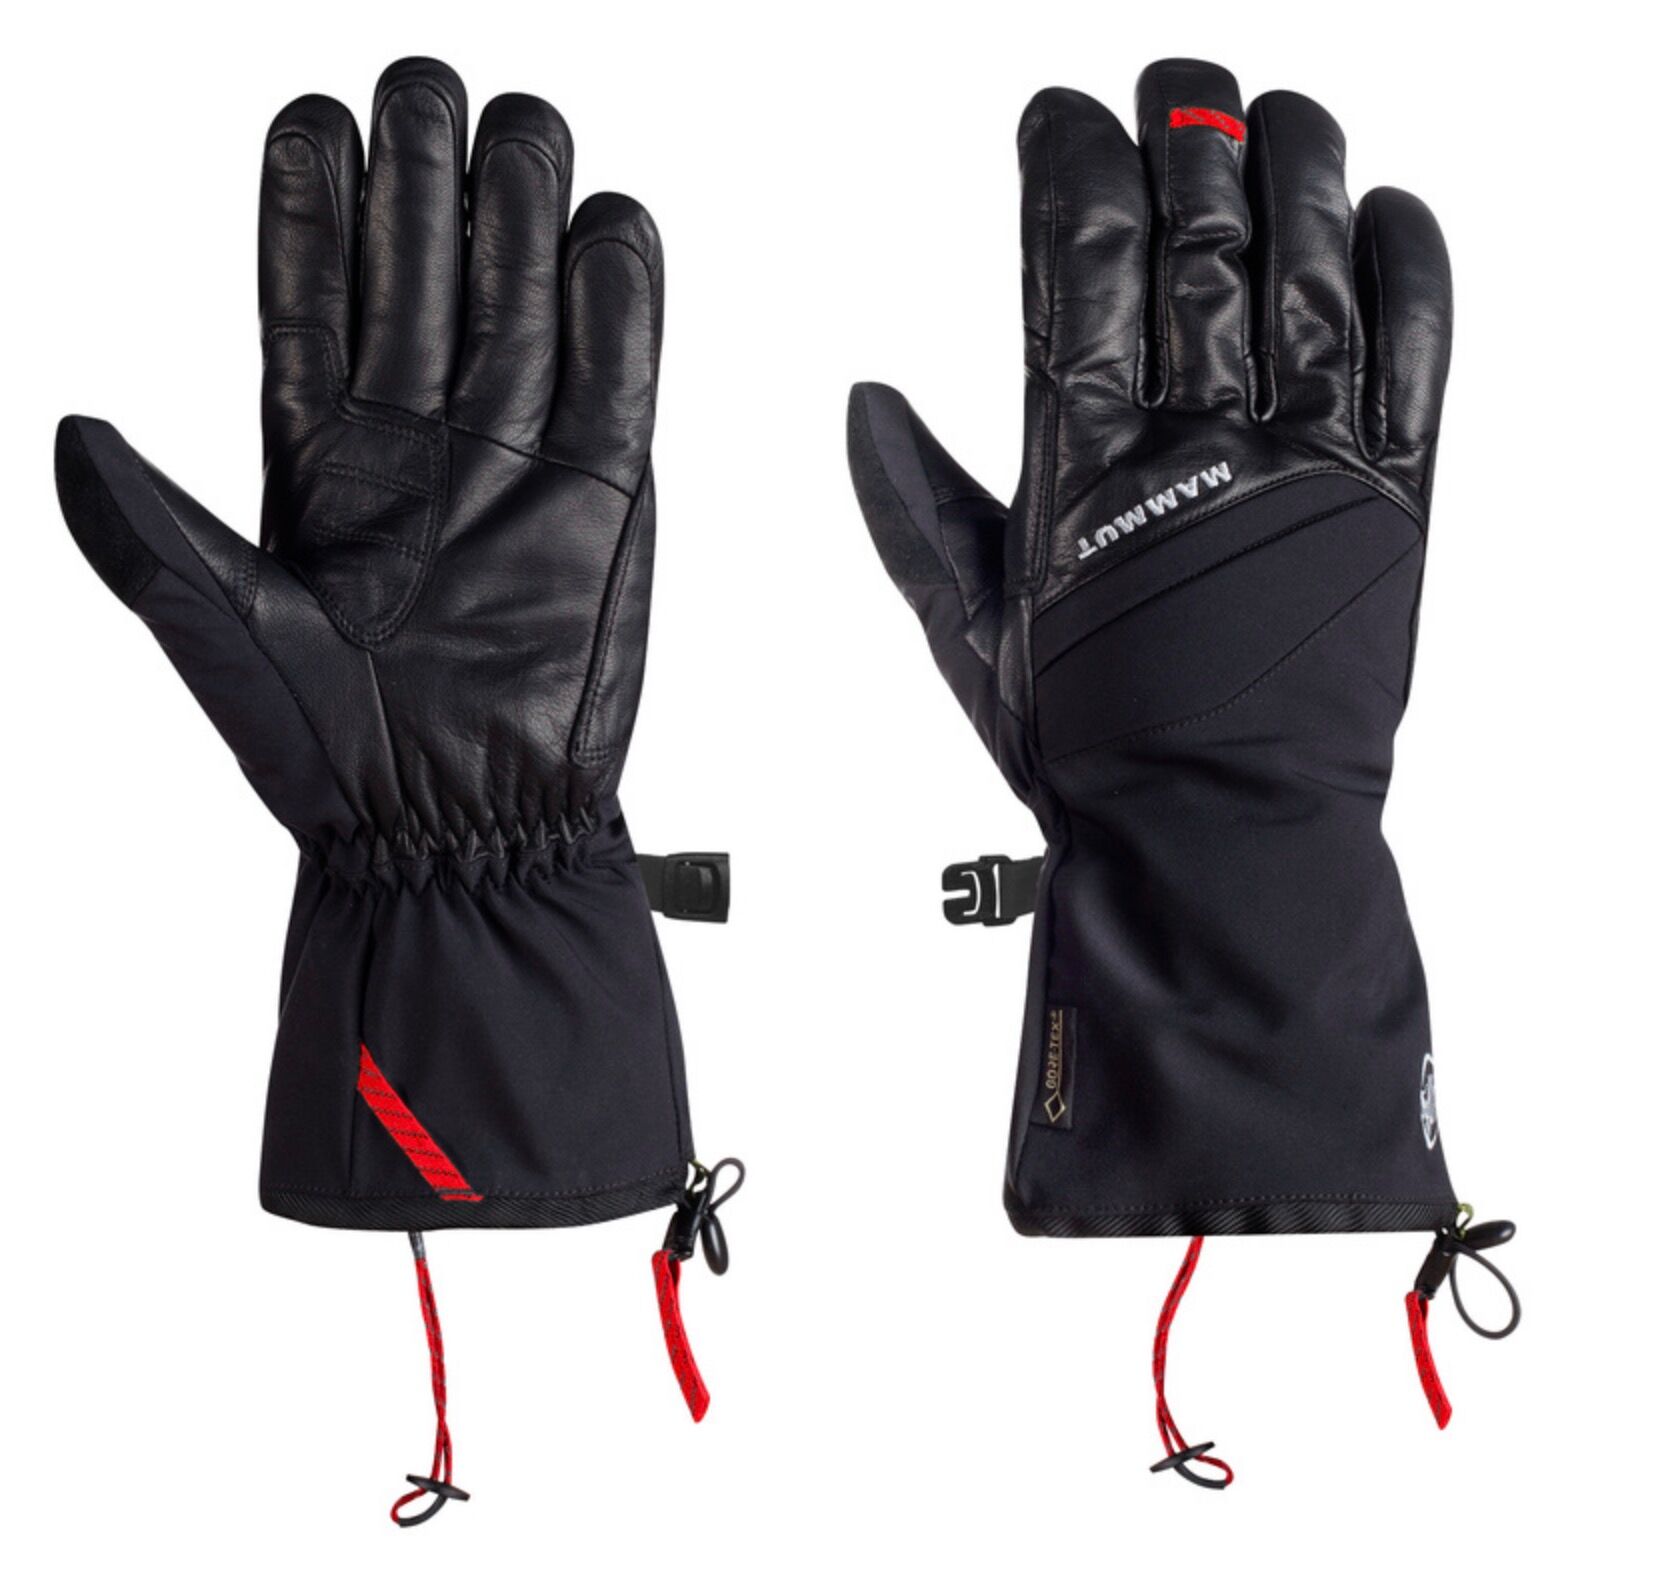 Mammut Meron Thermo 2 in 1 Glove - Handsker